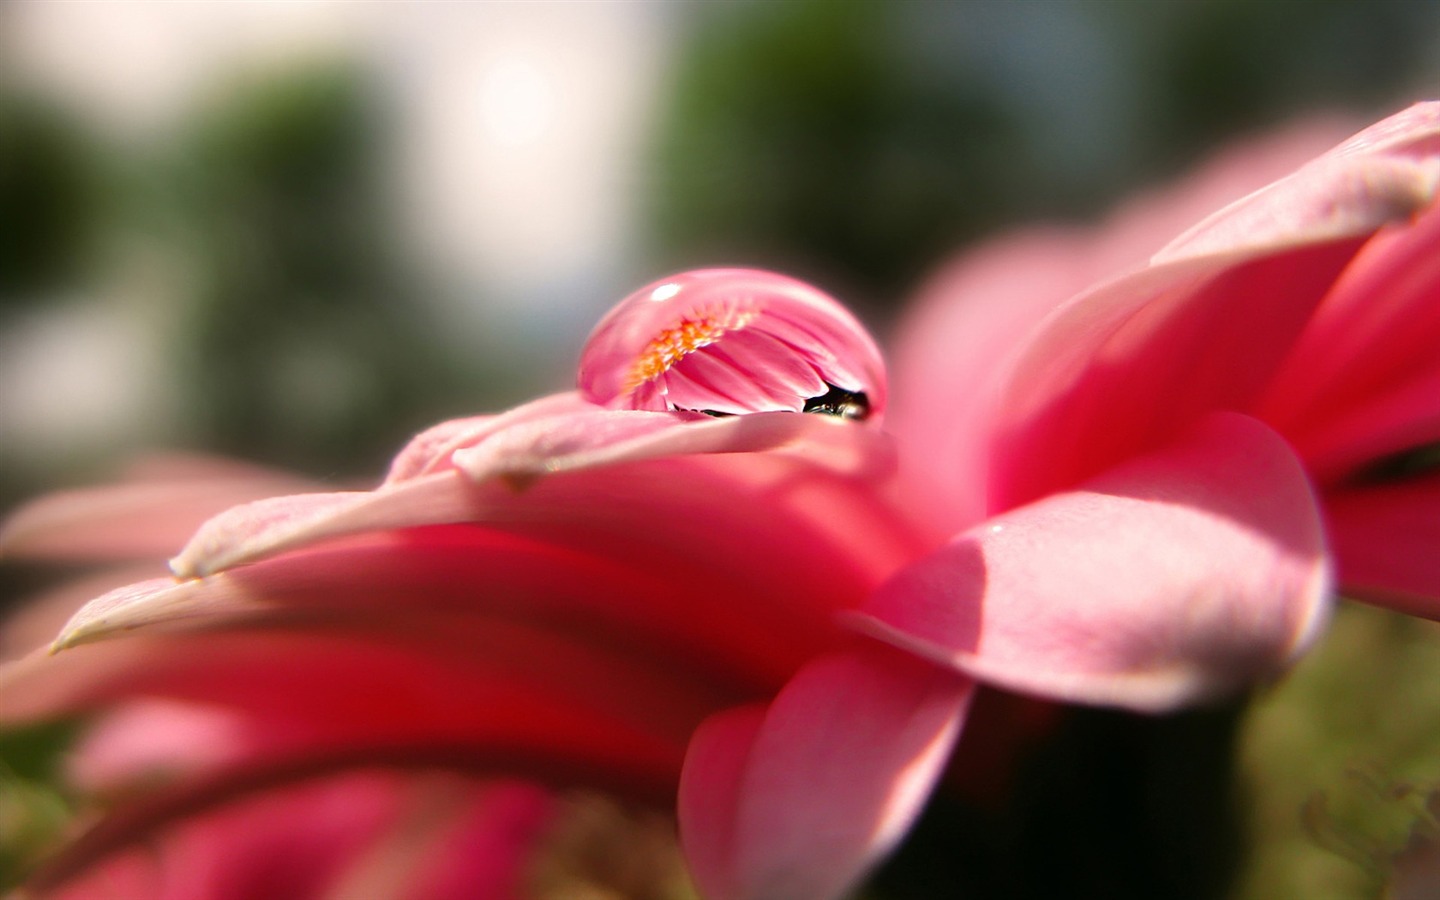 HD wallpaper flowers and drops of water #14 - 1440x900